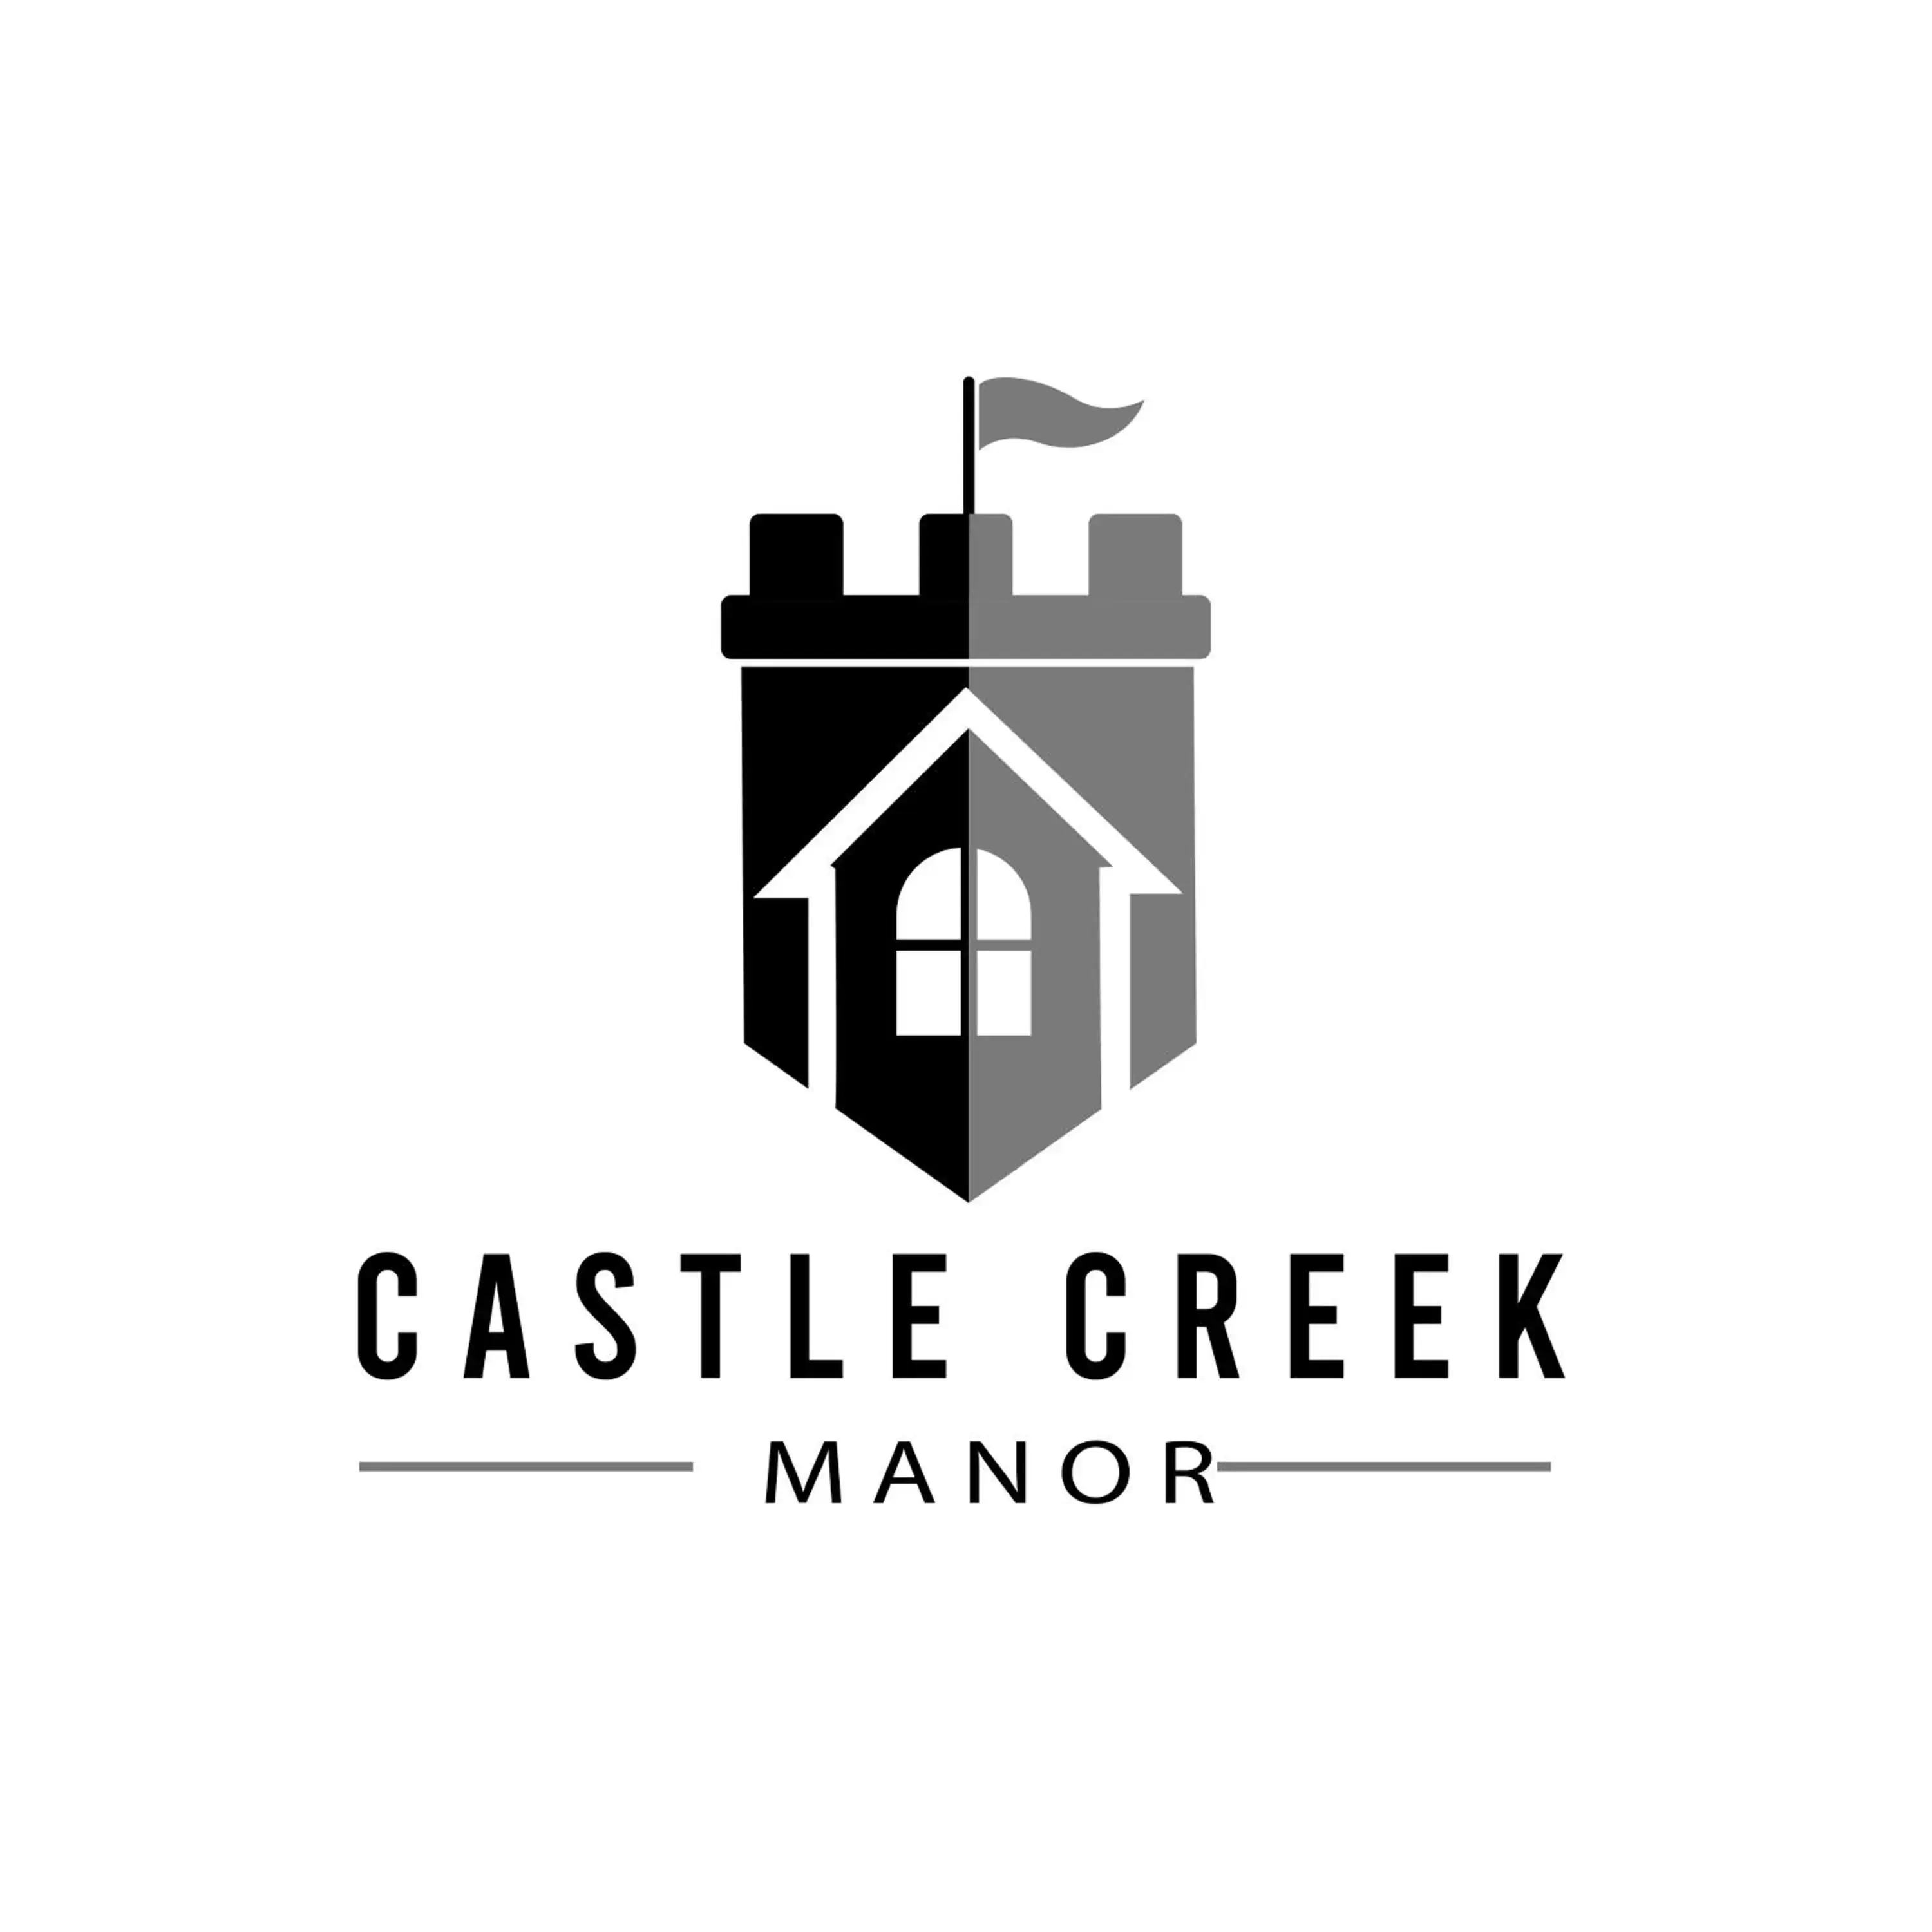 Property logo or sign in Castle Creek Manor